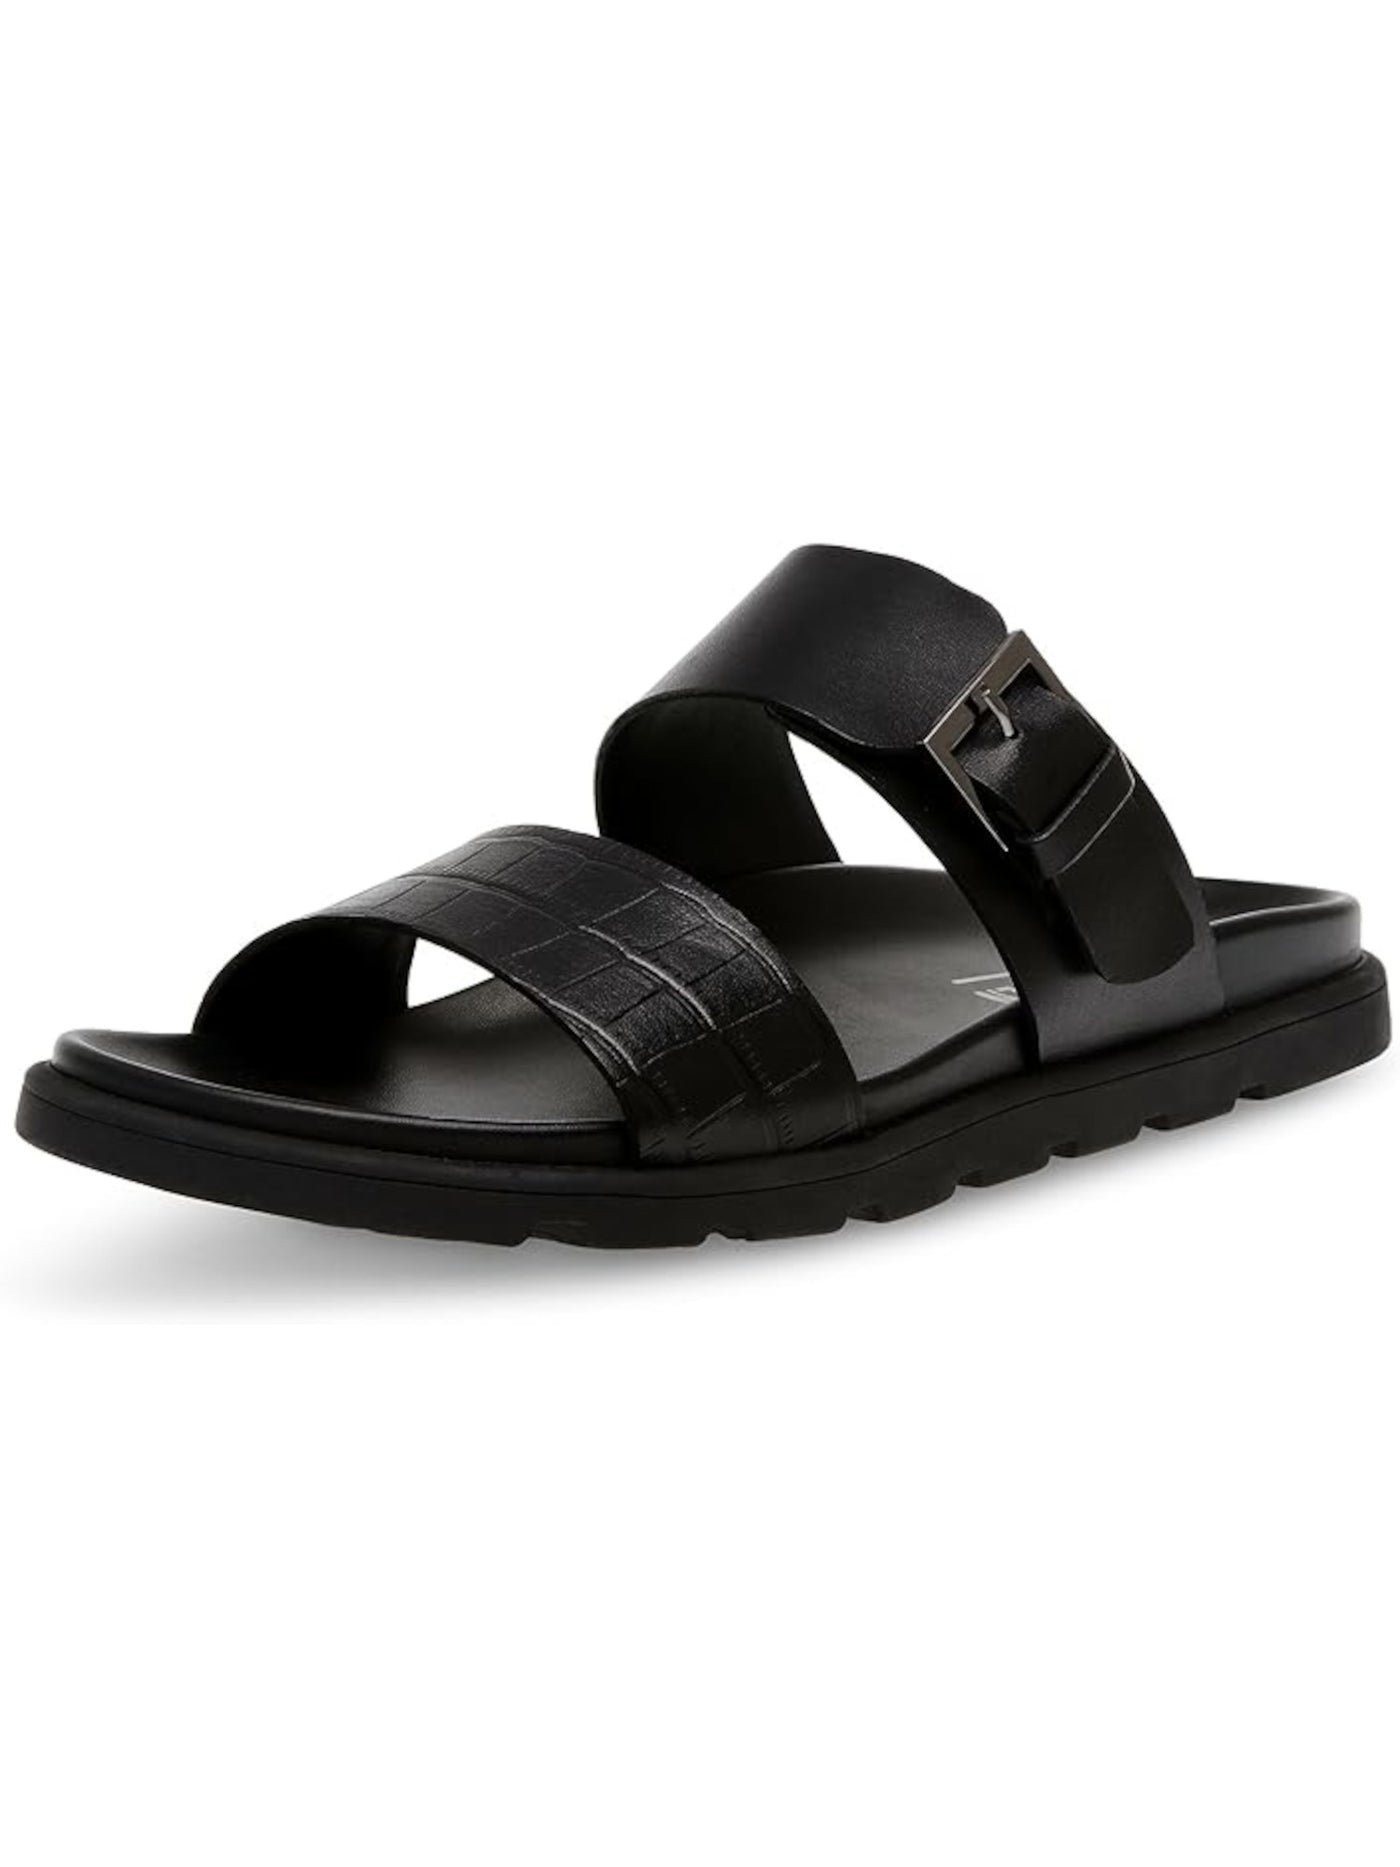 STEVE MADDEN Mens Black Embossed Front Strap Corro Round Toe Buckle Leather Sandals Shoes 10 M